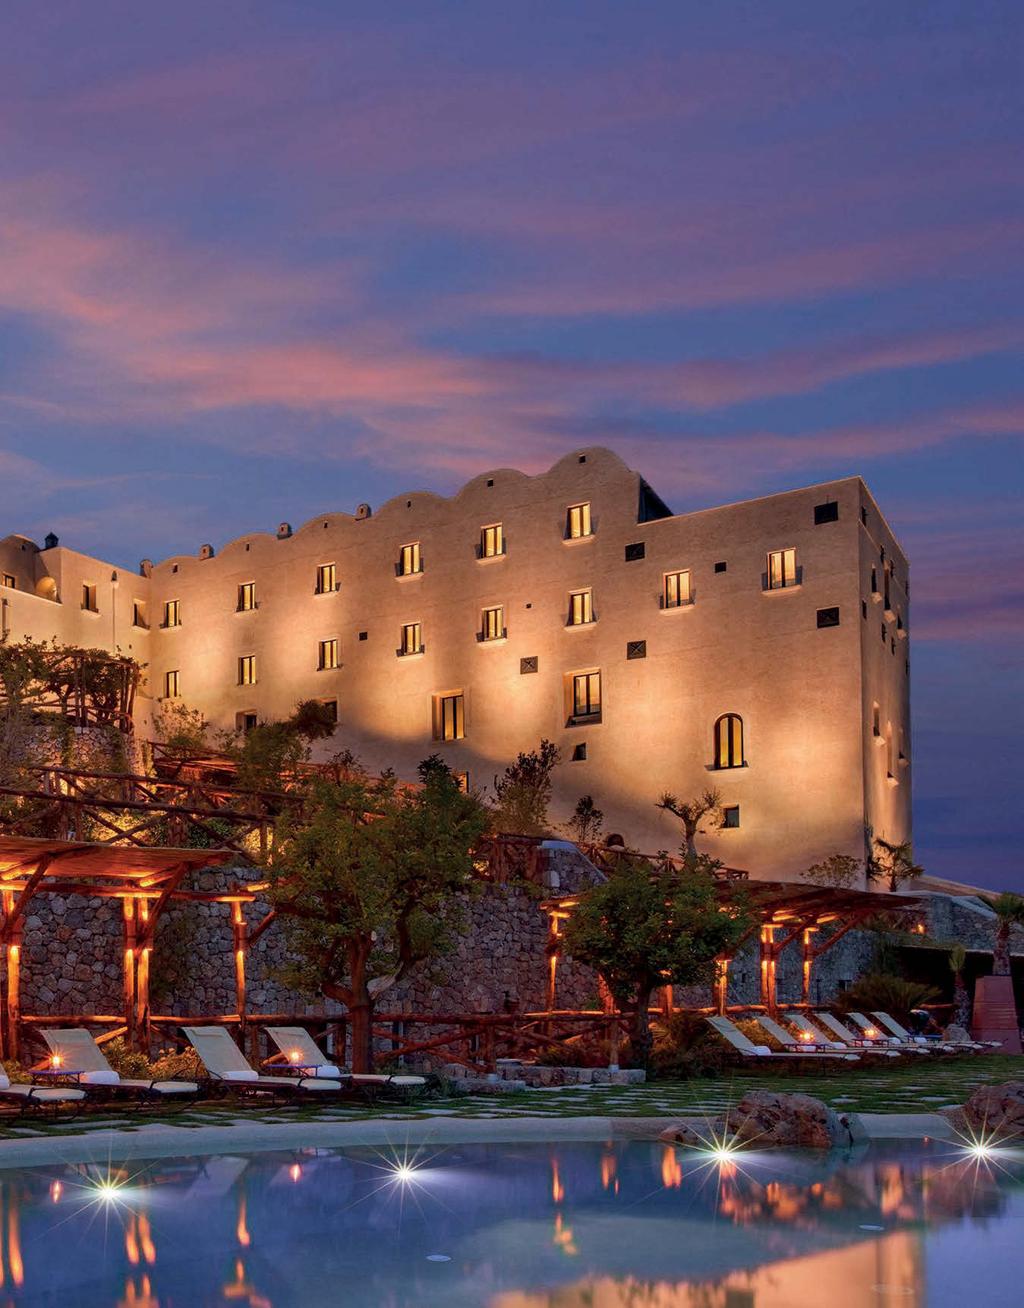 Monastero Santa Rosa Hotel and Spa is perched between sea and sky on a cliff edge on Italy s Amalfi Coast.